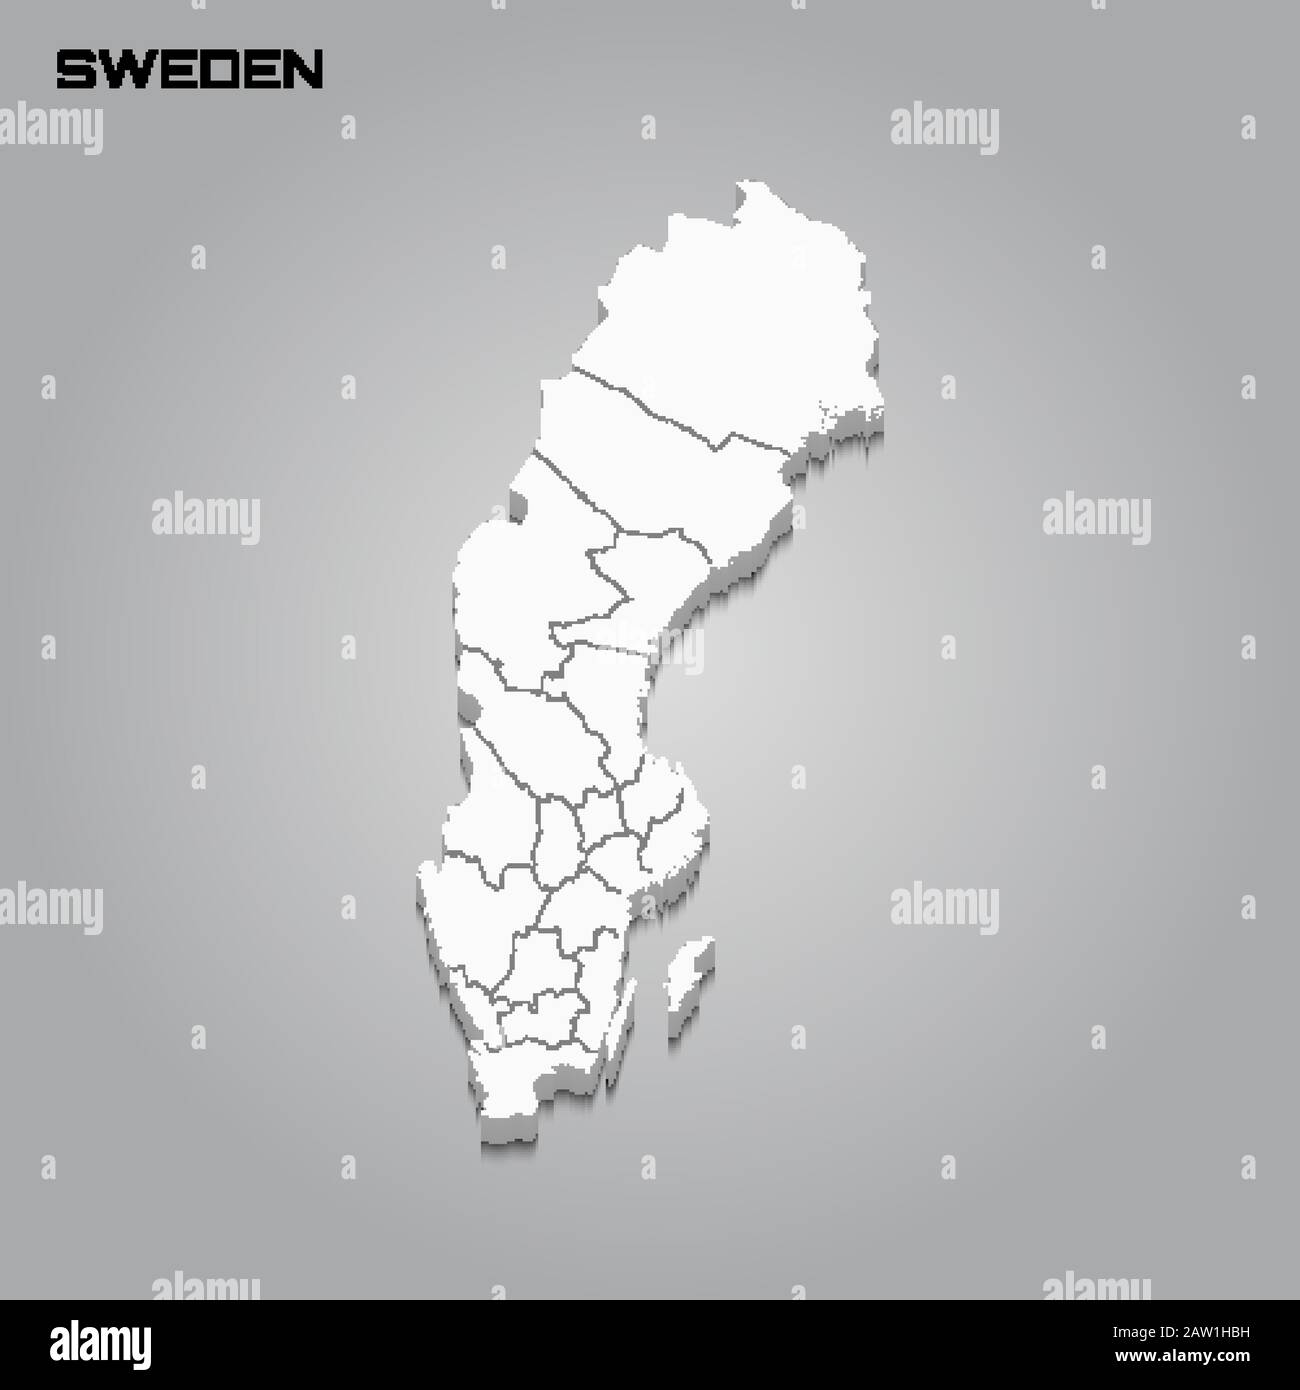 Sweden 3d map with borders of regions. Vector illustration Stock Vector